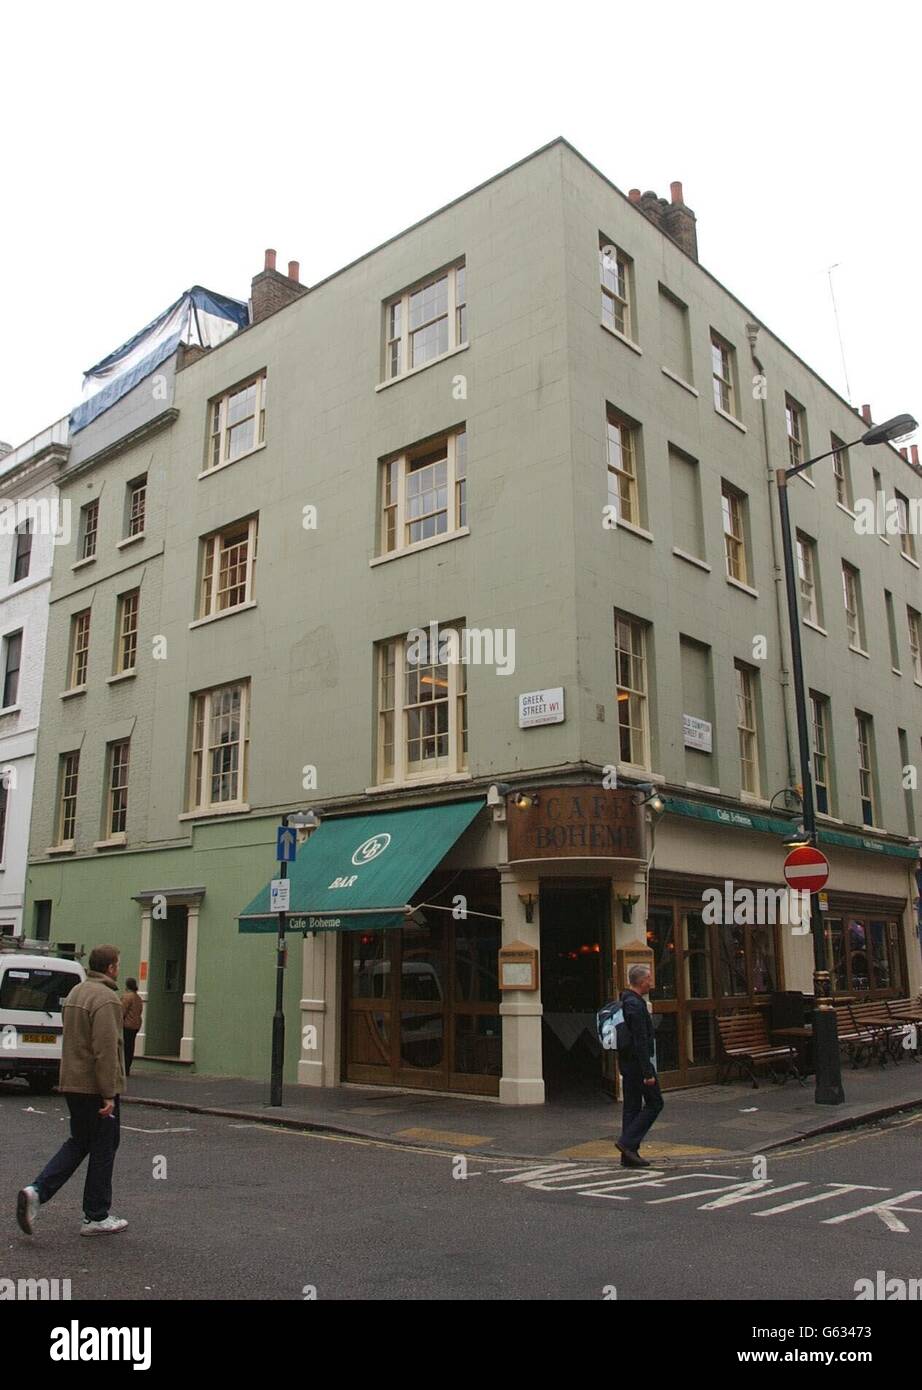 Soho House restaurant and club, which occupies the upper floors of the building cornering Greek Street and Old Compton Street, in Soho, where the child of movie stars Jude Law and Sadie Frost allegedly swallowed an ecstasy tablet. Stock Photo